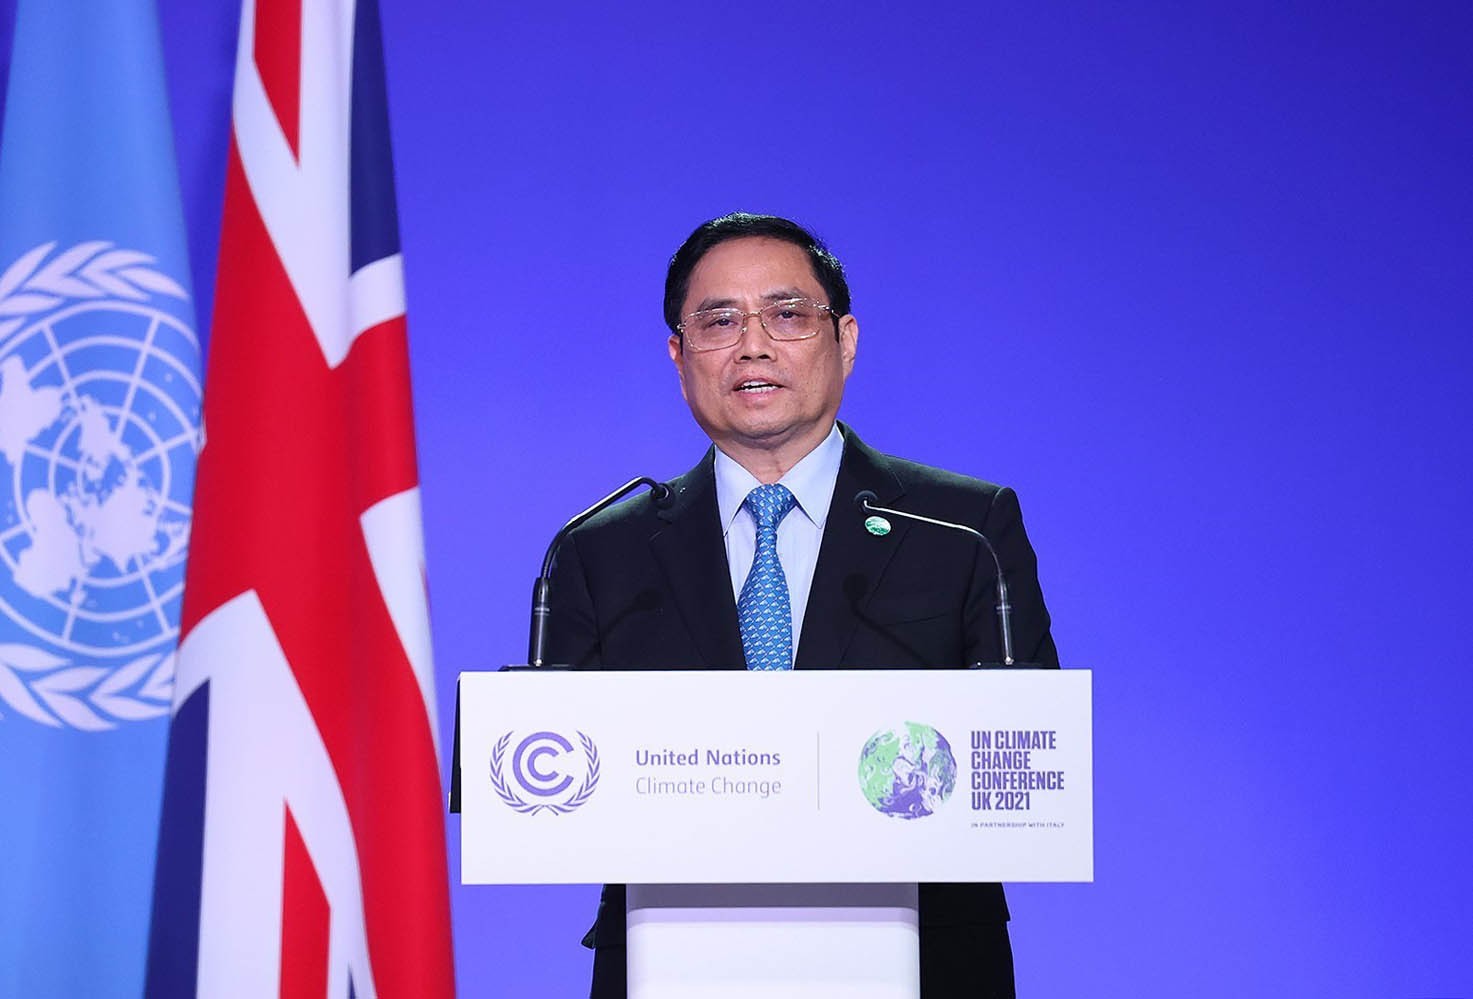 Prime Minister Pham Minh Chinh calls on nations to make commitments to reduce greenhouse emissions